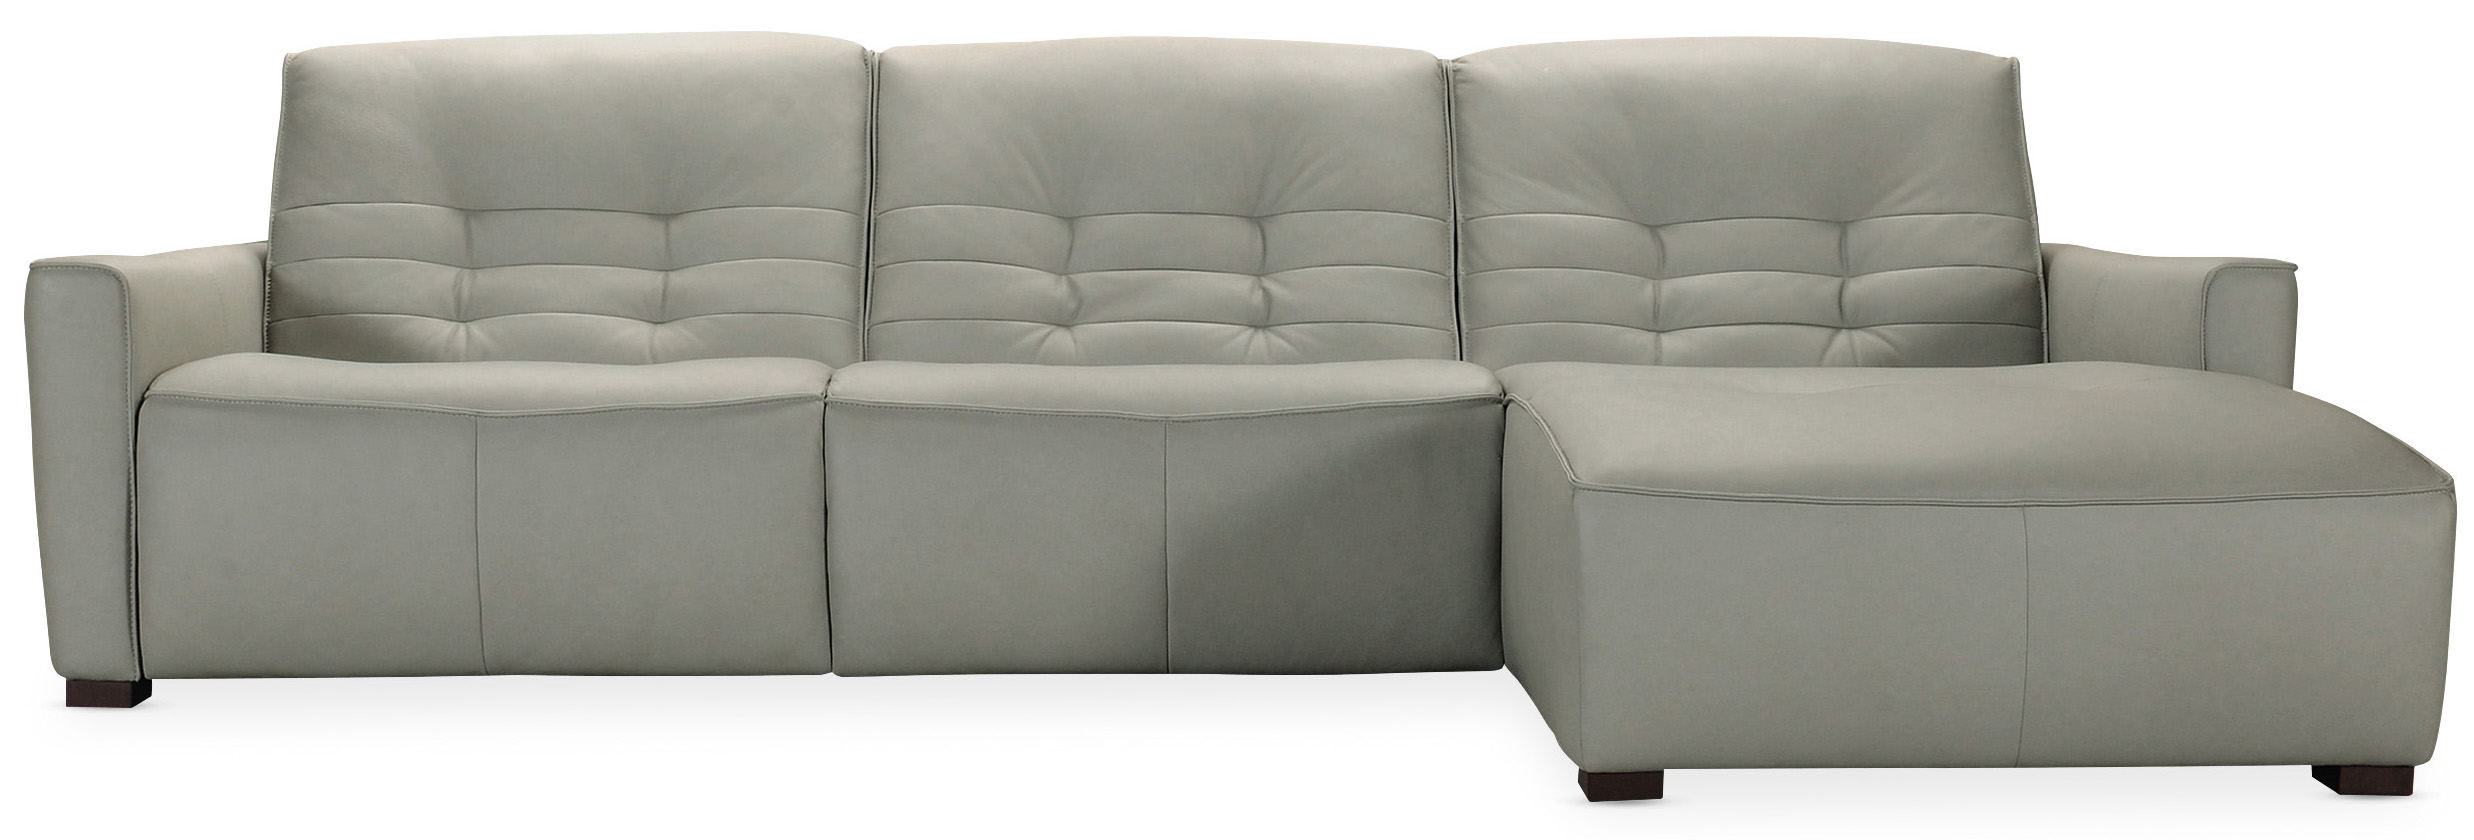 Picture of Reaux 3-Piece RAF Chaise Sofa